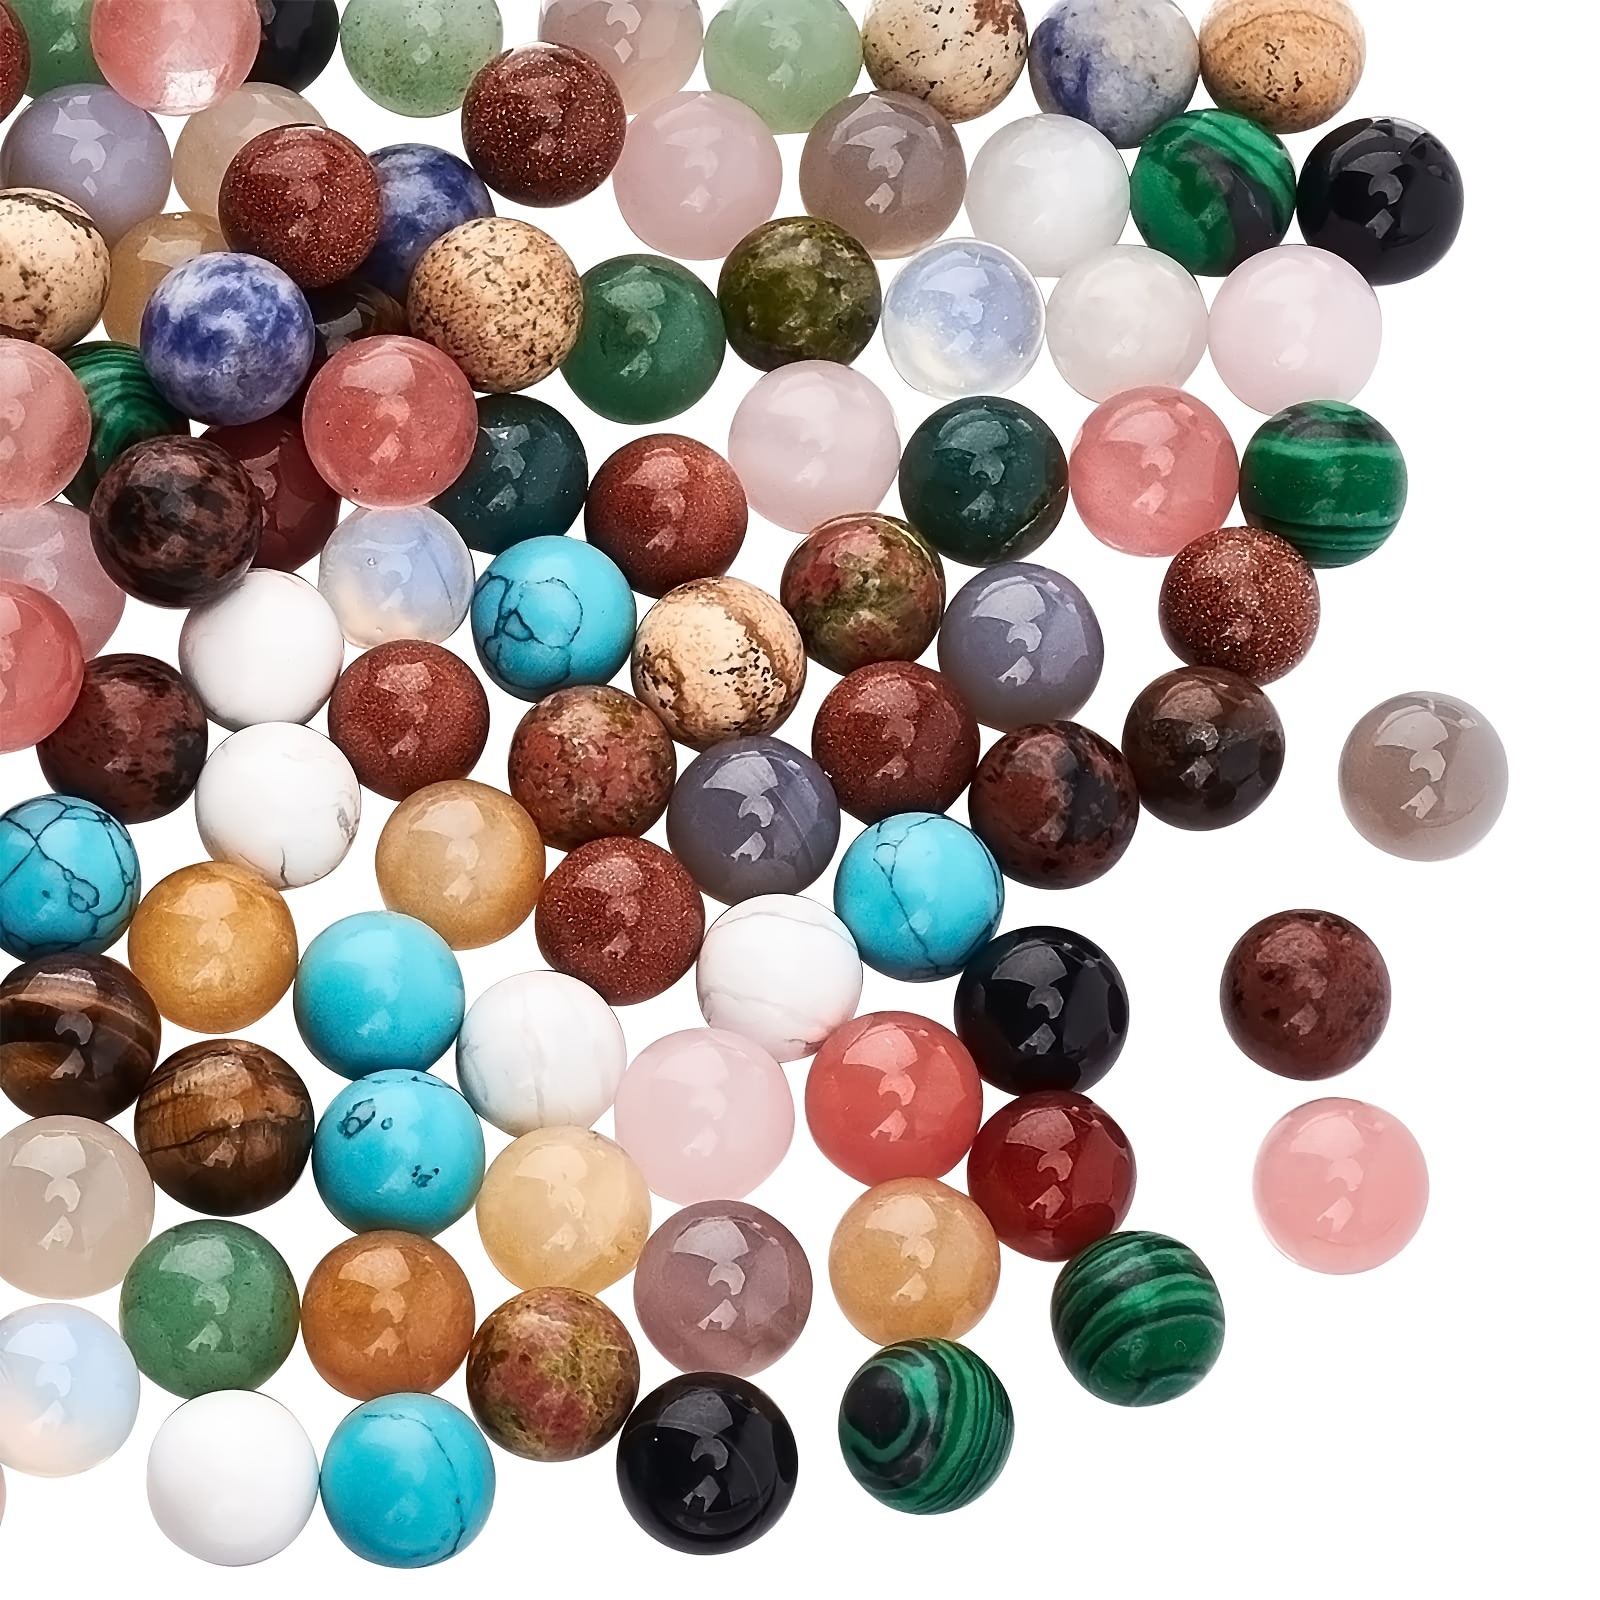 100 PCS 10mm Natural Gemstone Beads Loose Beads Stone Charms For Jewelry Making